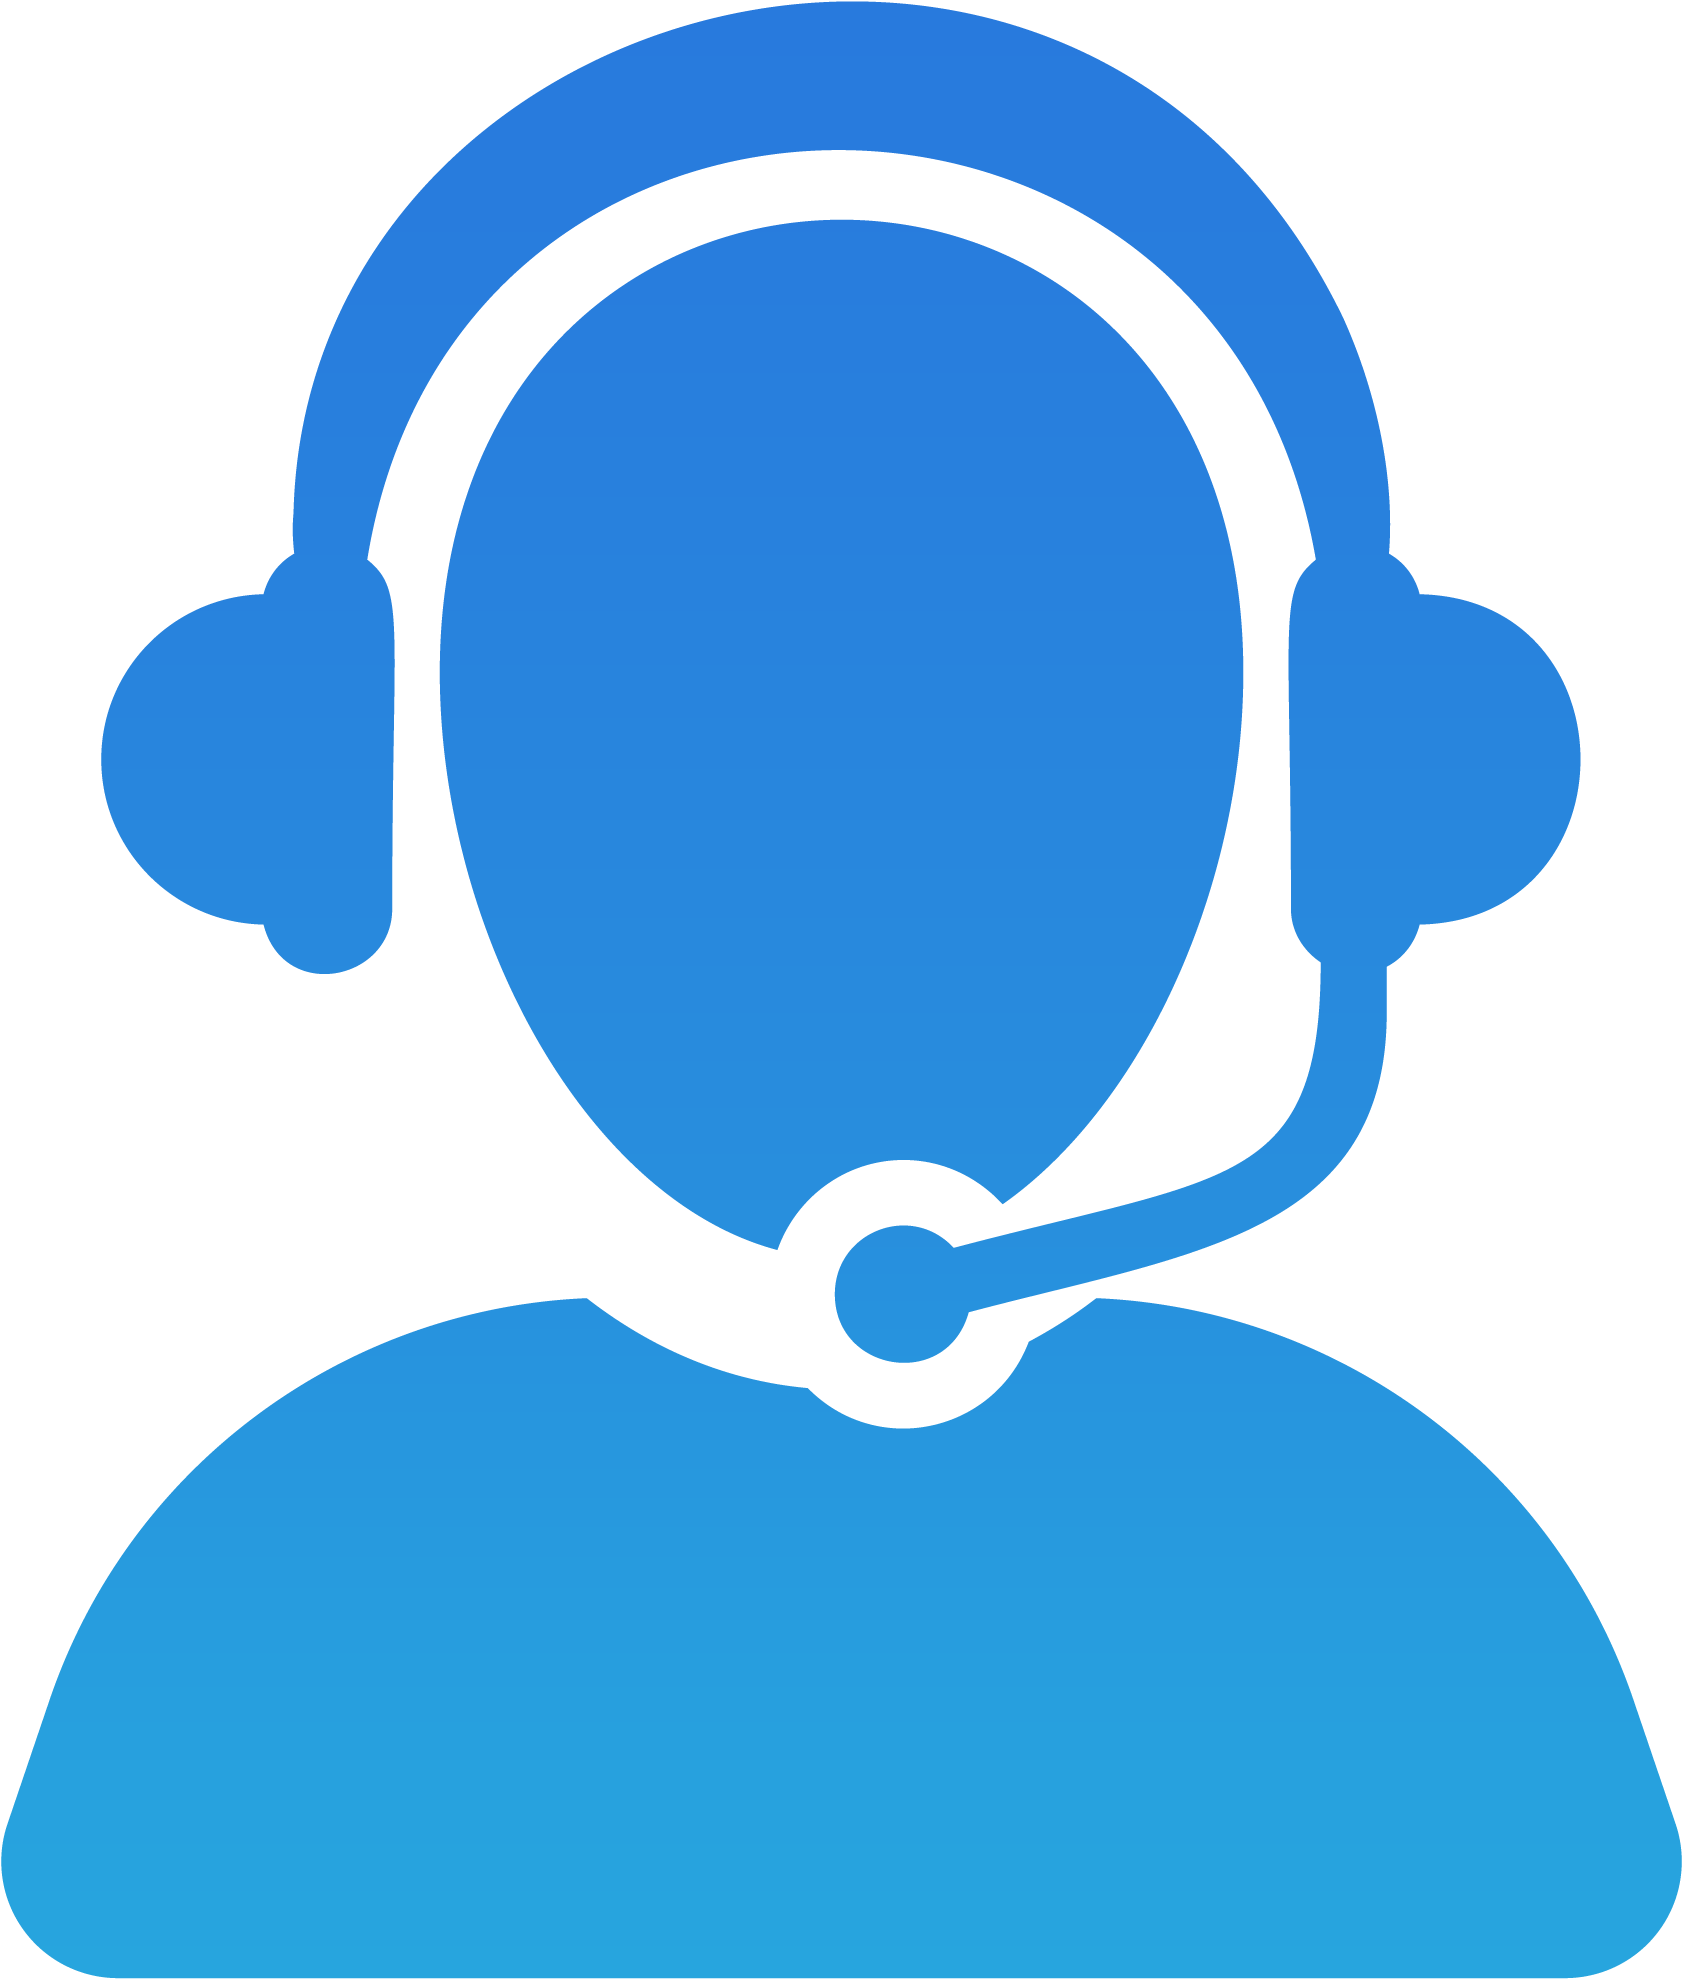 Technical Support - Audio And Video Transcription (2000x2000)